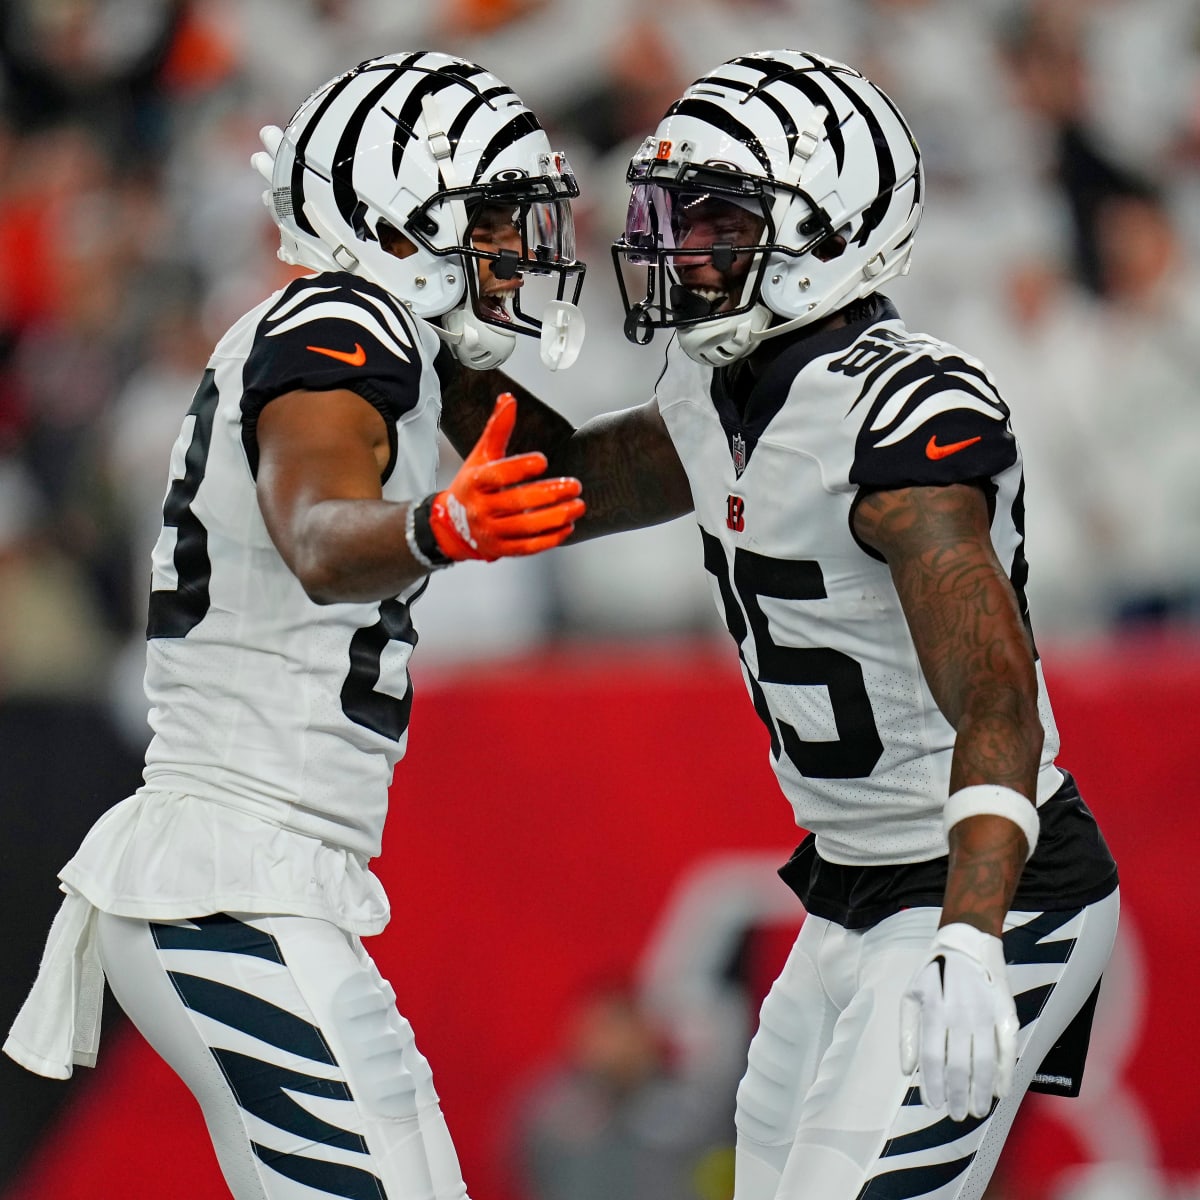 Should Bengals follow Patriots, redesign jerseys with color rush?